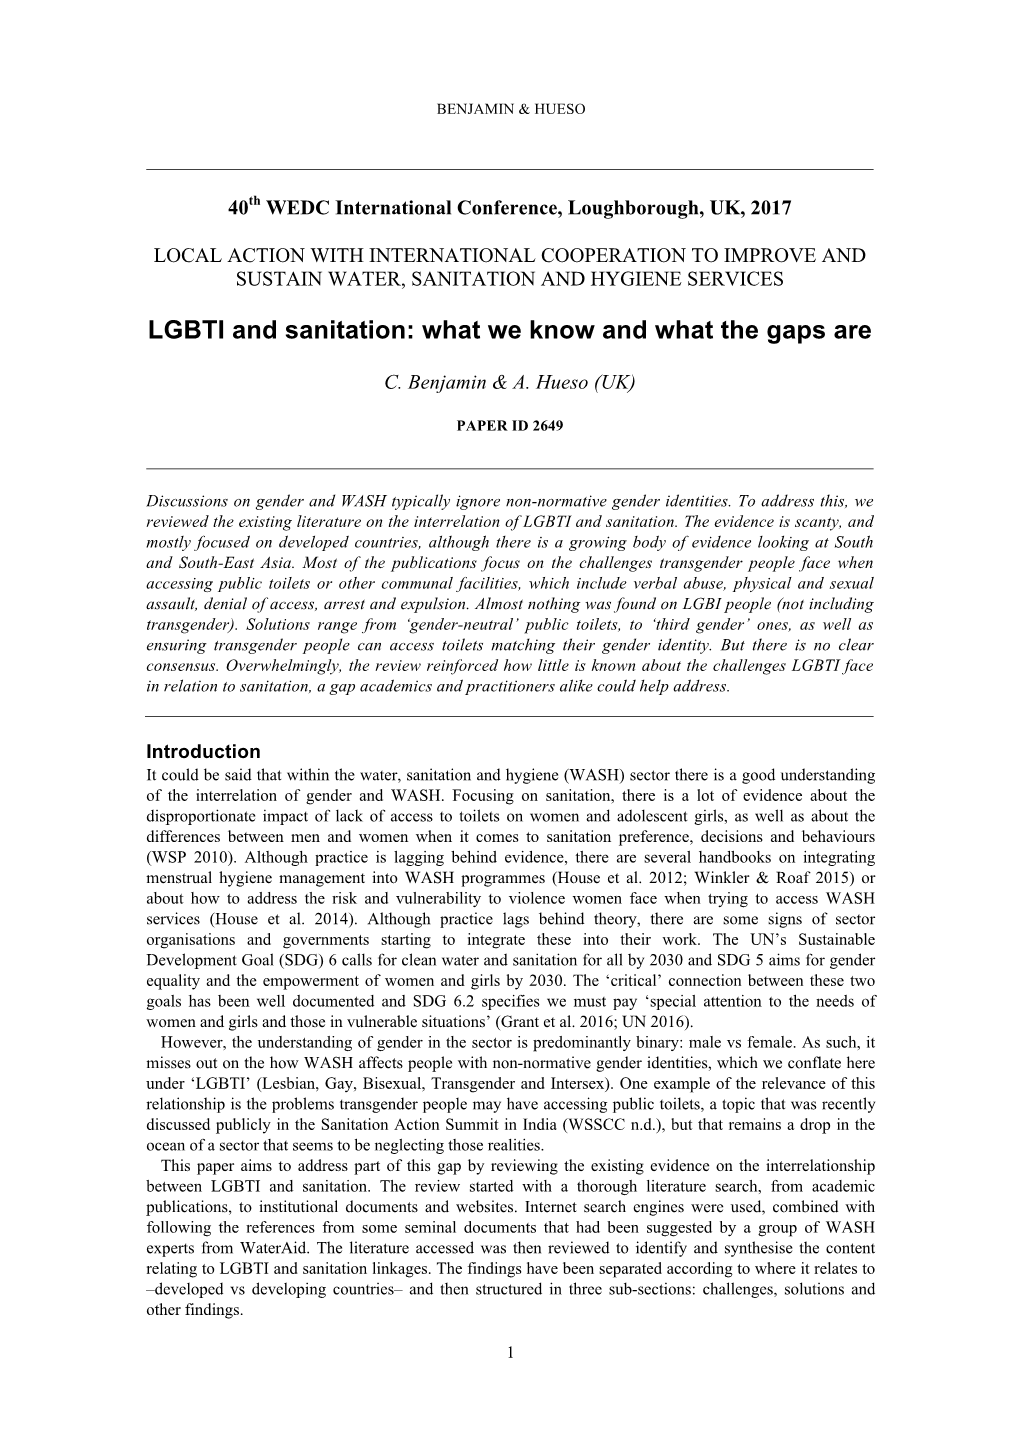 LGBTI and Sanitation: What We Know and What the Gaps Are